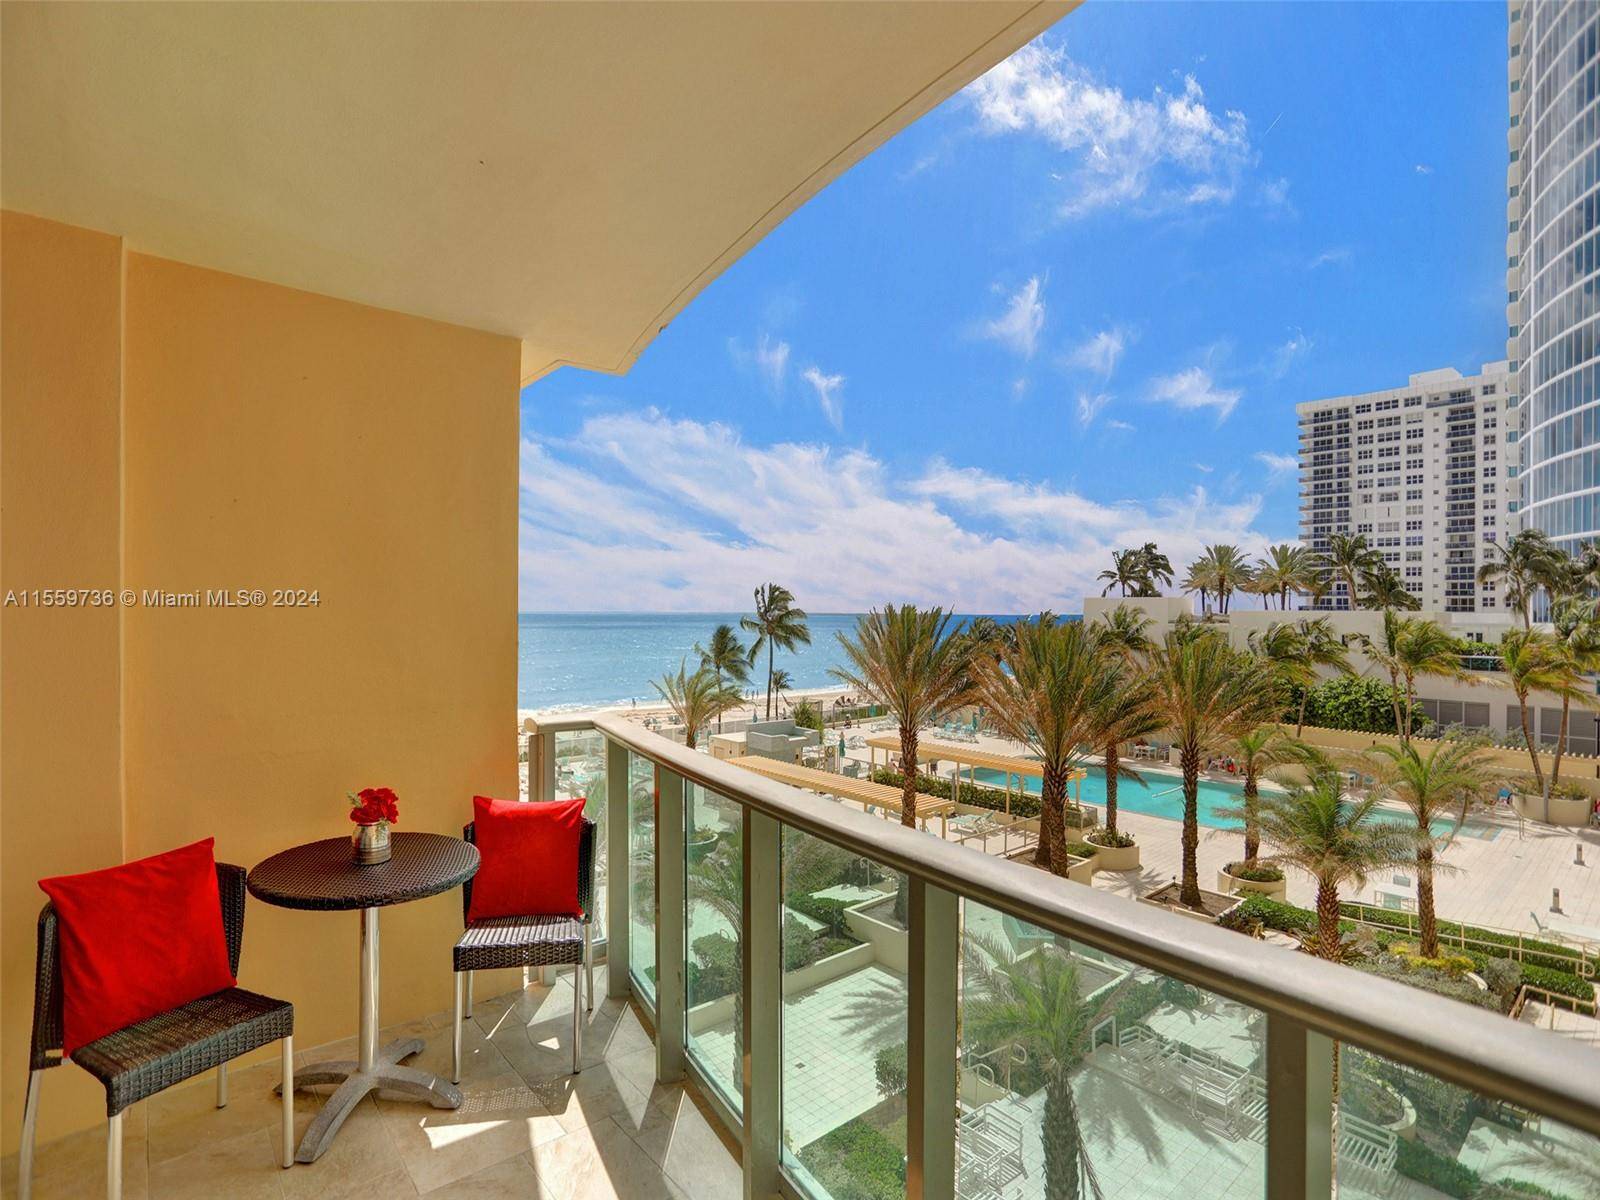 Great opportunity to own a Beachfront condo offering breathtaking ocean and pool area views.